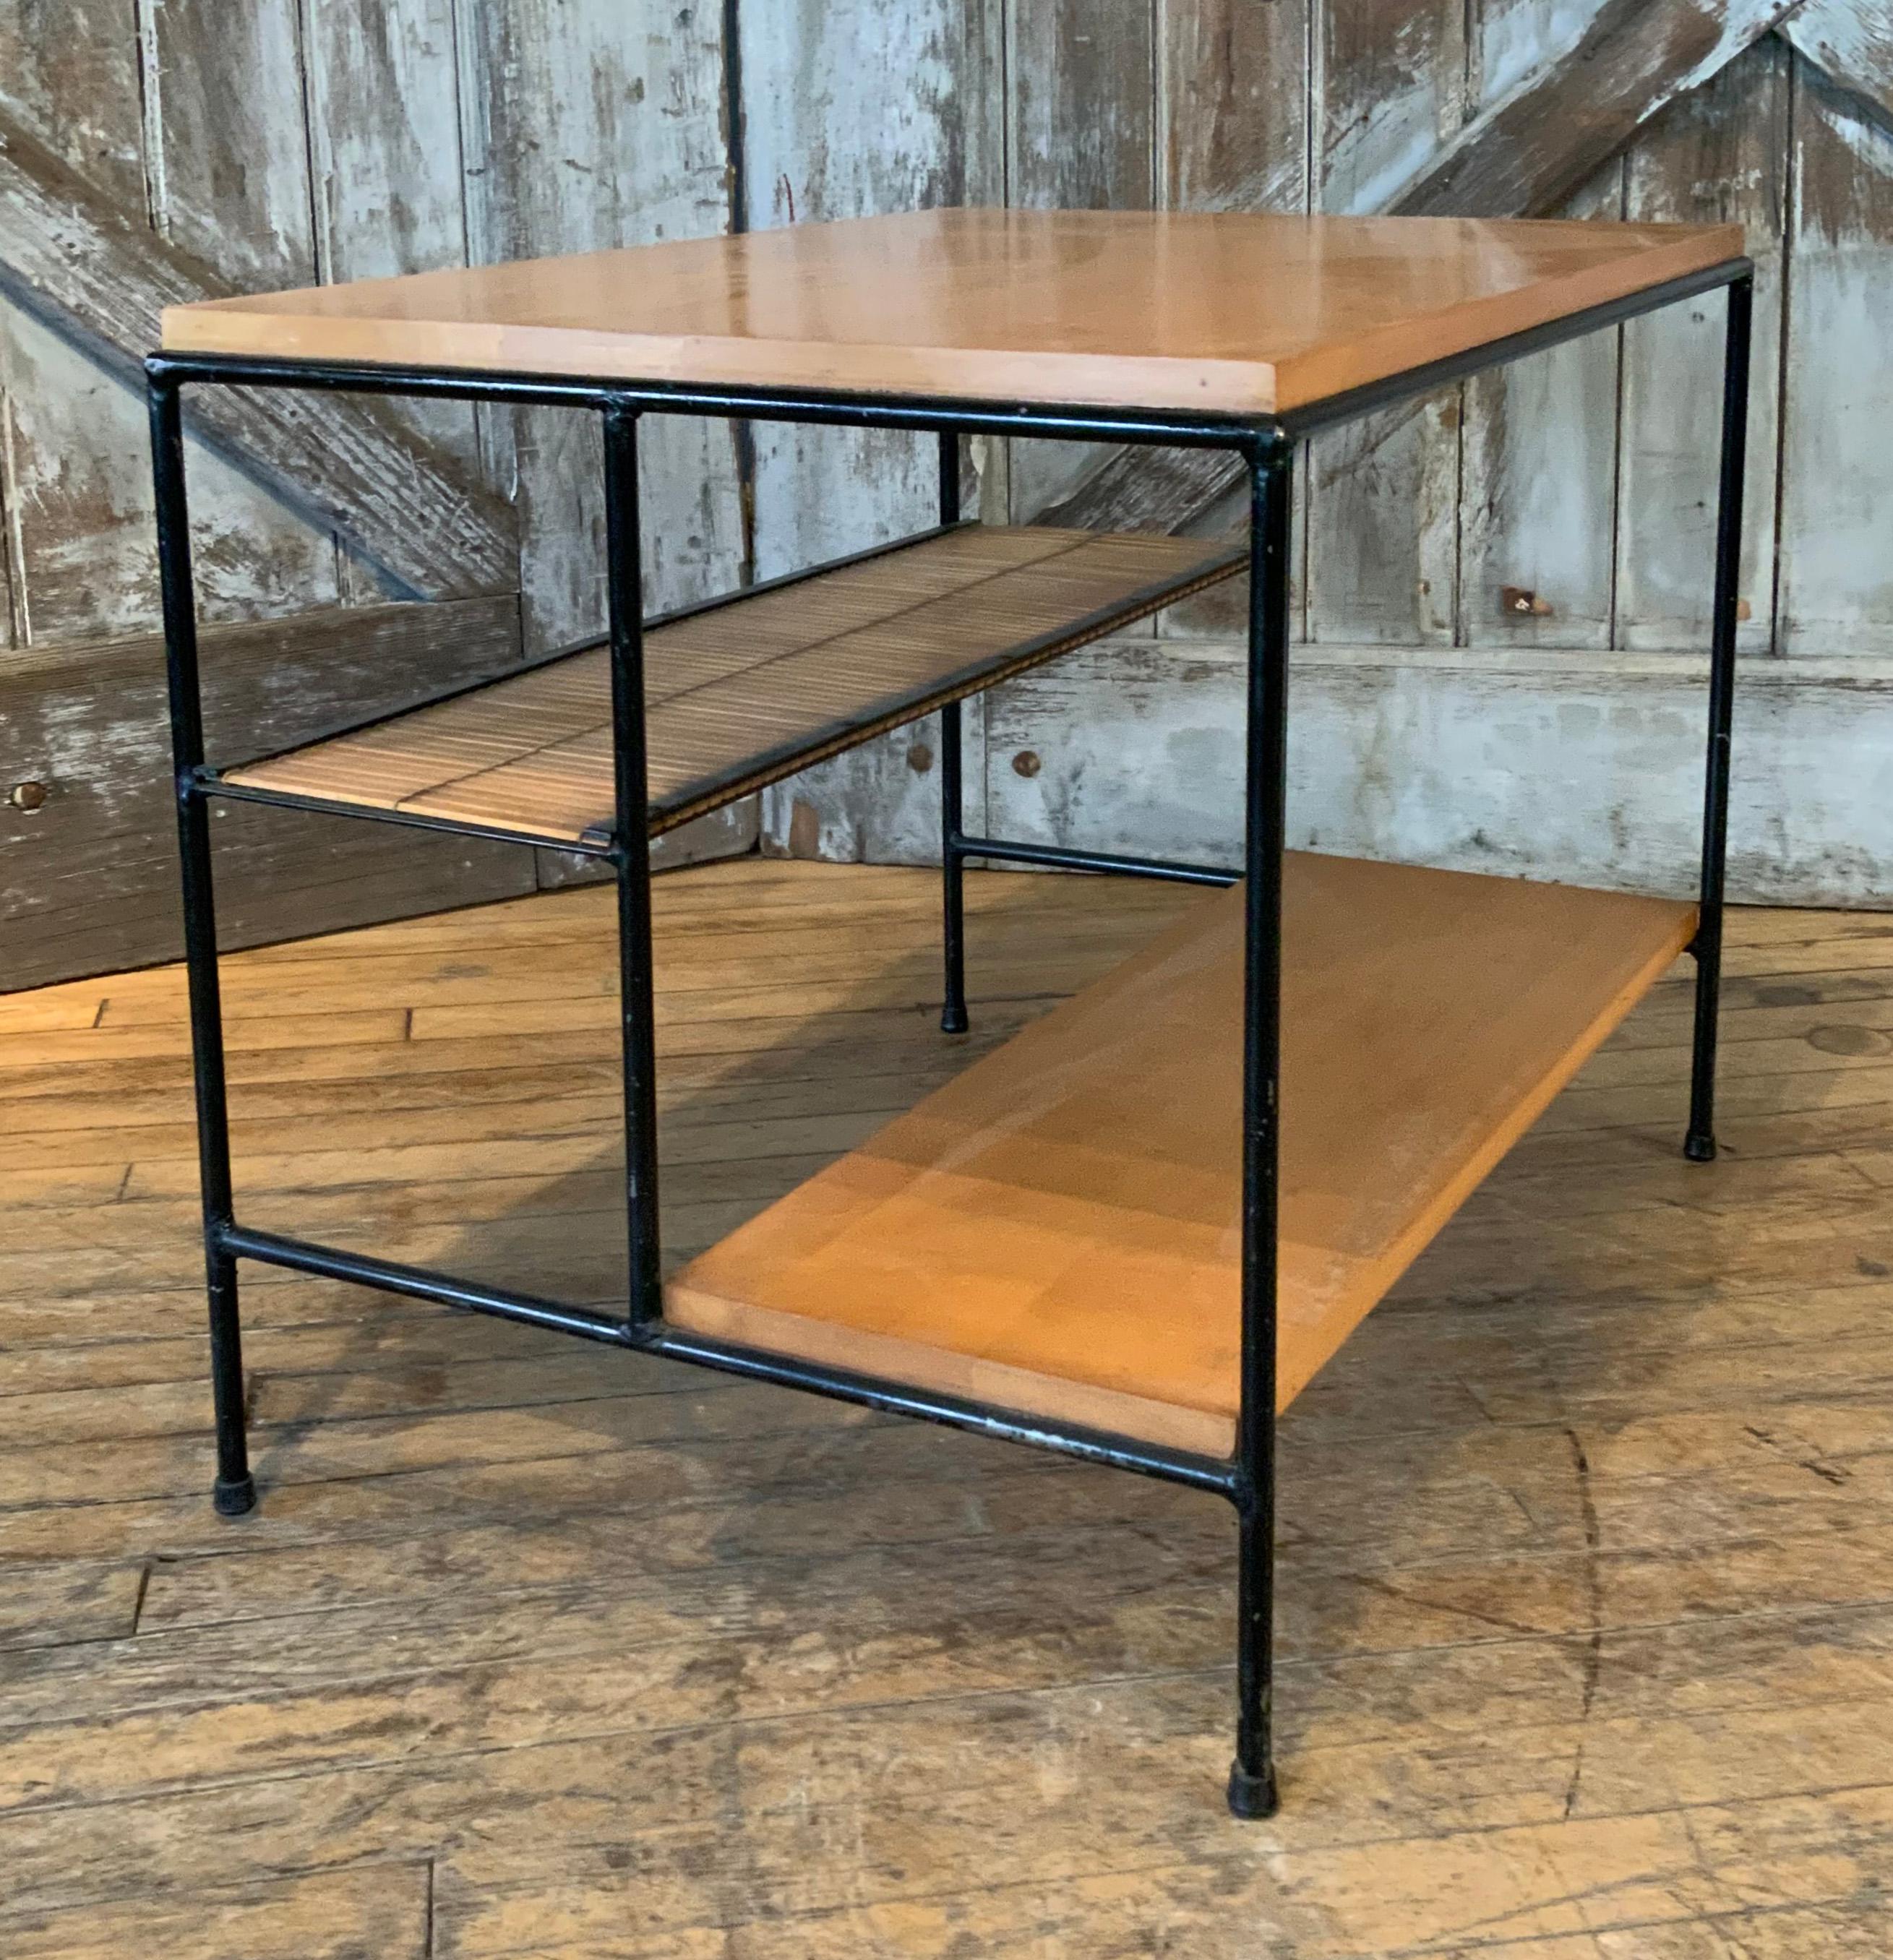 A very handsome 1950s table or nightstand by Paul McCobb, from the Planner Group series for Winchendon, with wrought iron frame in original black finish, birch top and lower shelf, and woven rattan mat middle shelf. in good condition overall with